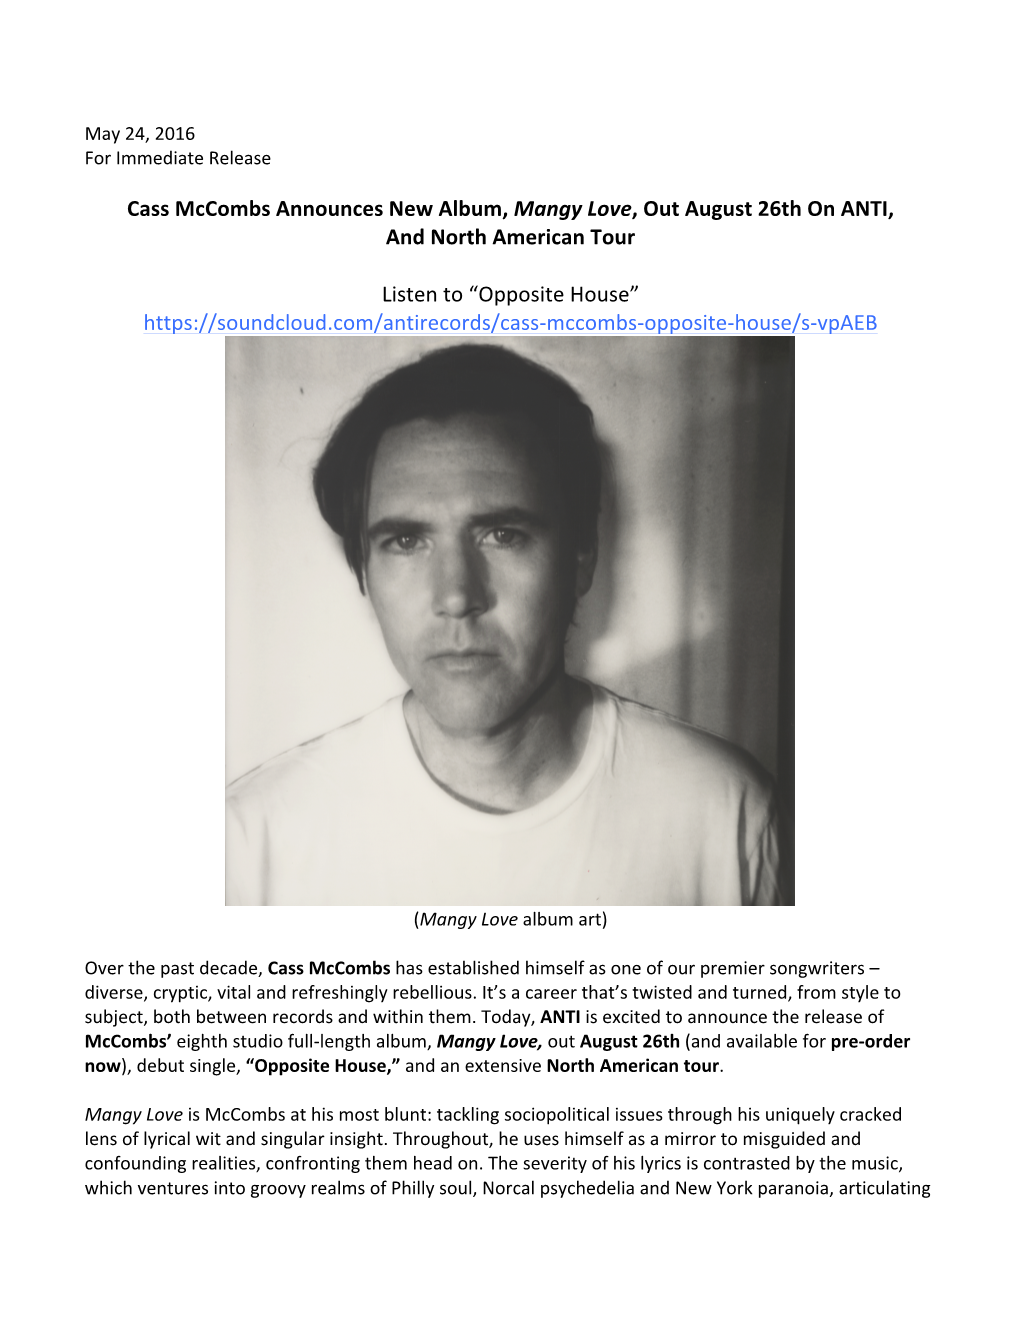 Cass Mccombs Announces New Album, Mangy Love, out August 26Th on ANTI, and North American Tour